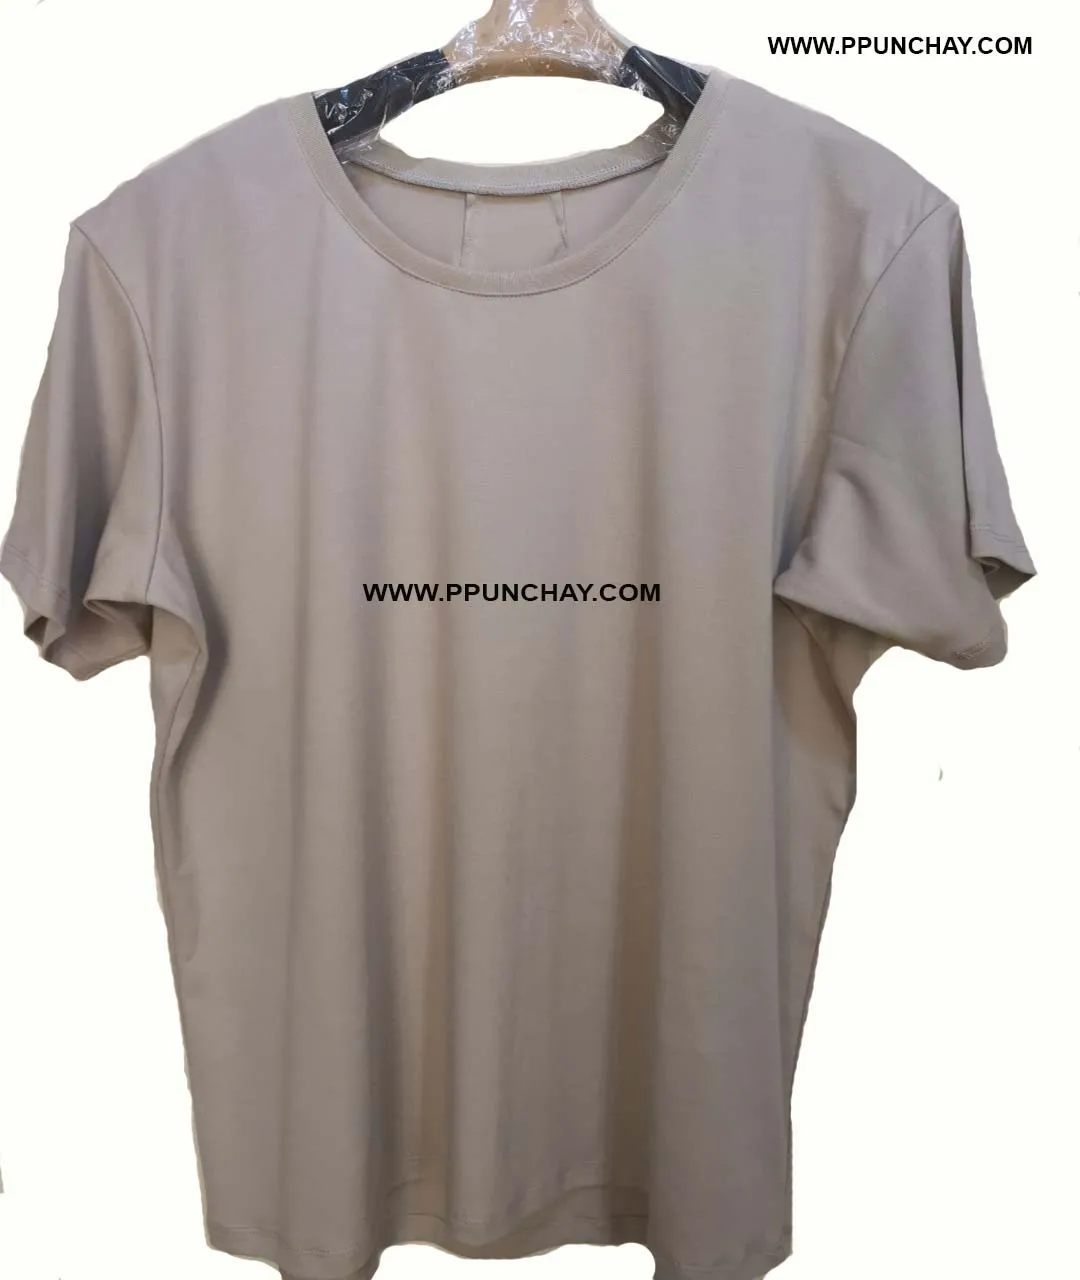 Source T Shirt in Organic Pima Cotton Ppunchay Peru Extra Soft and Nice Made in on m.alibaba.com